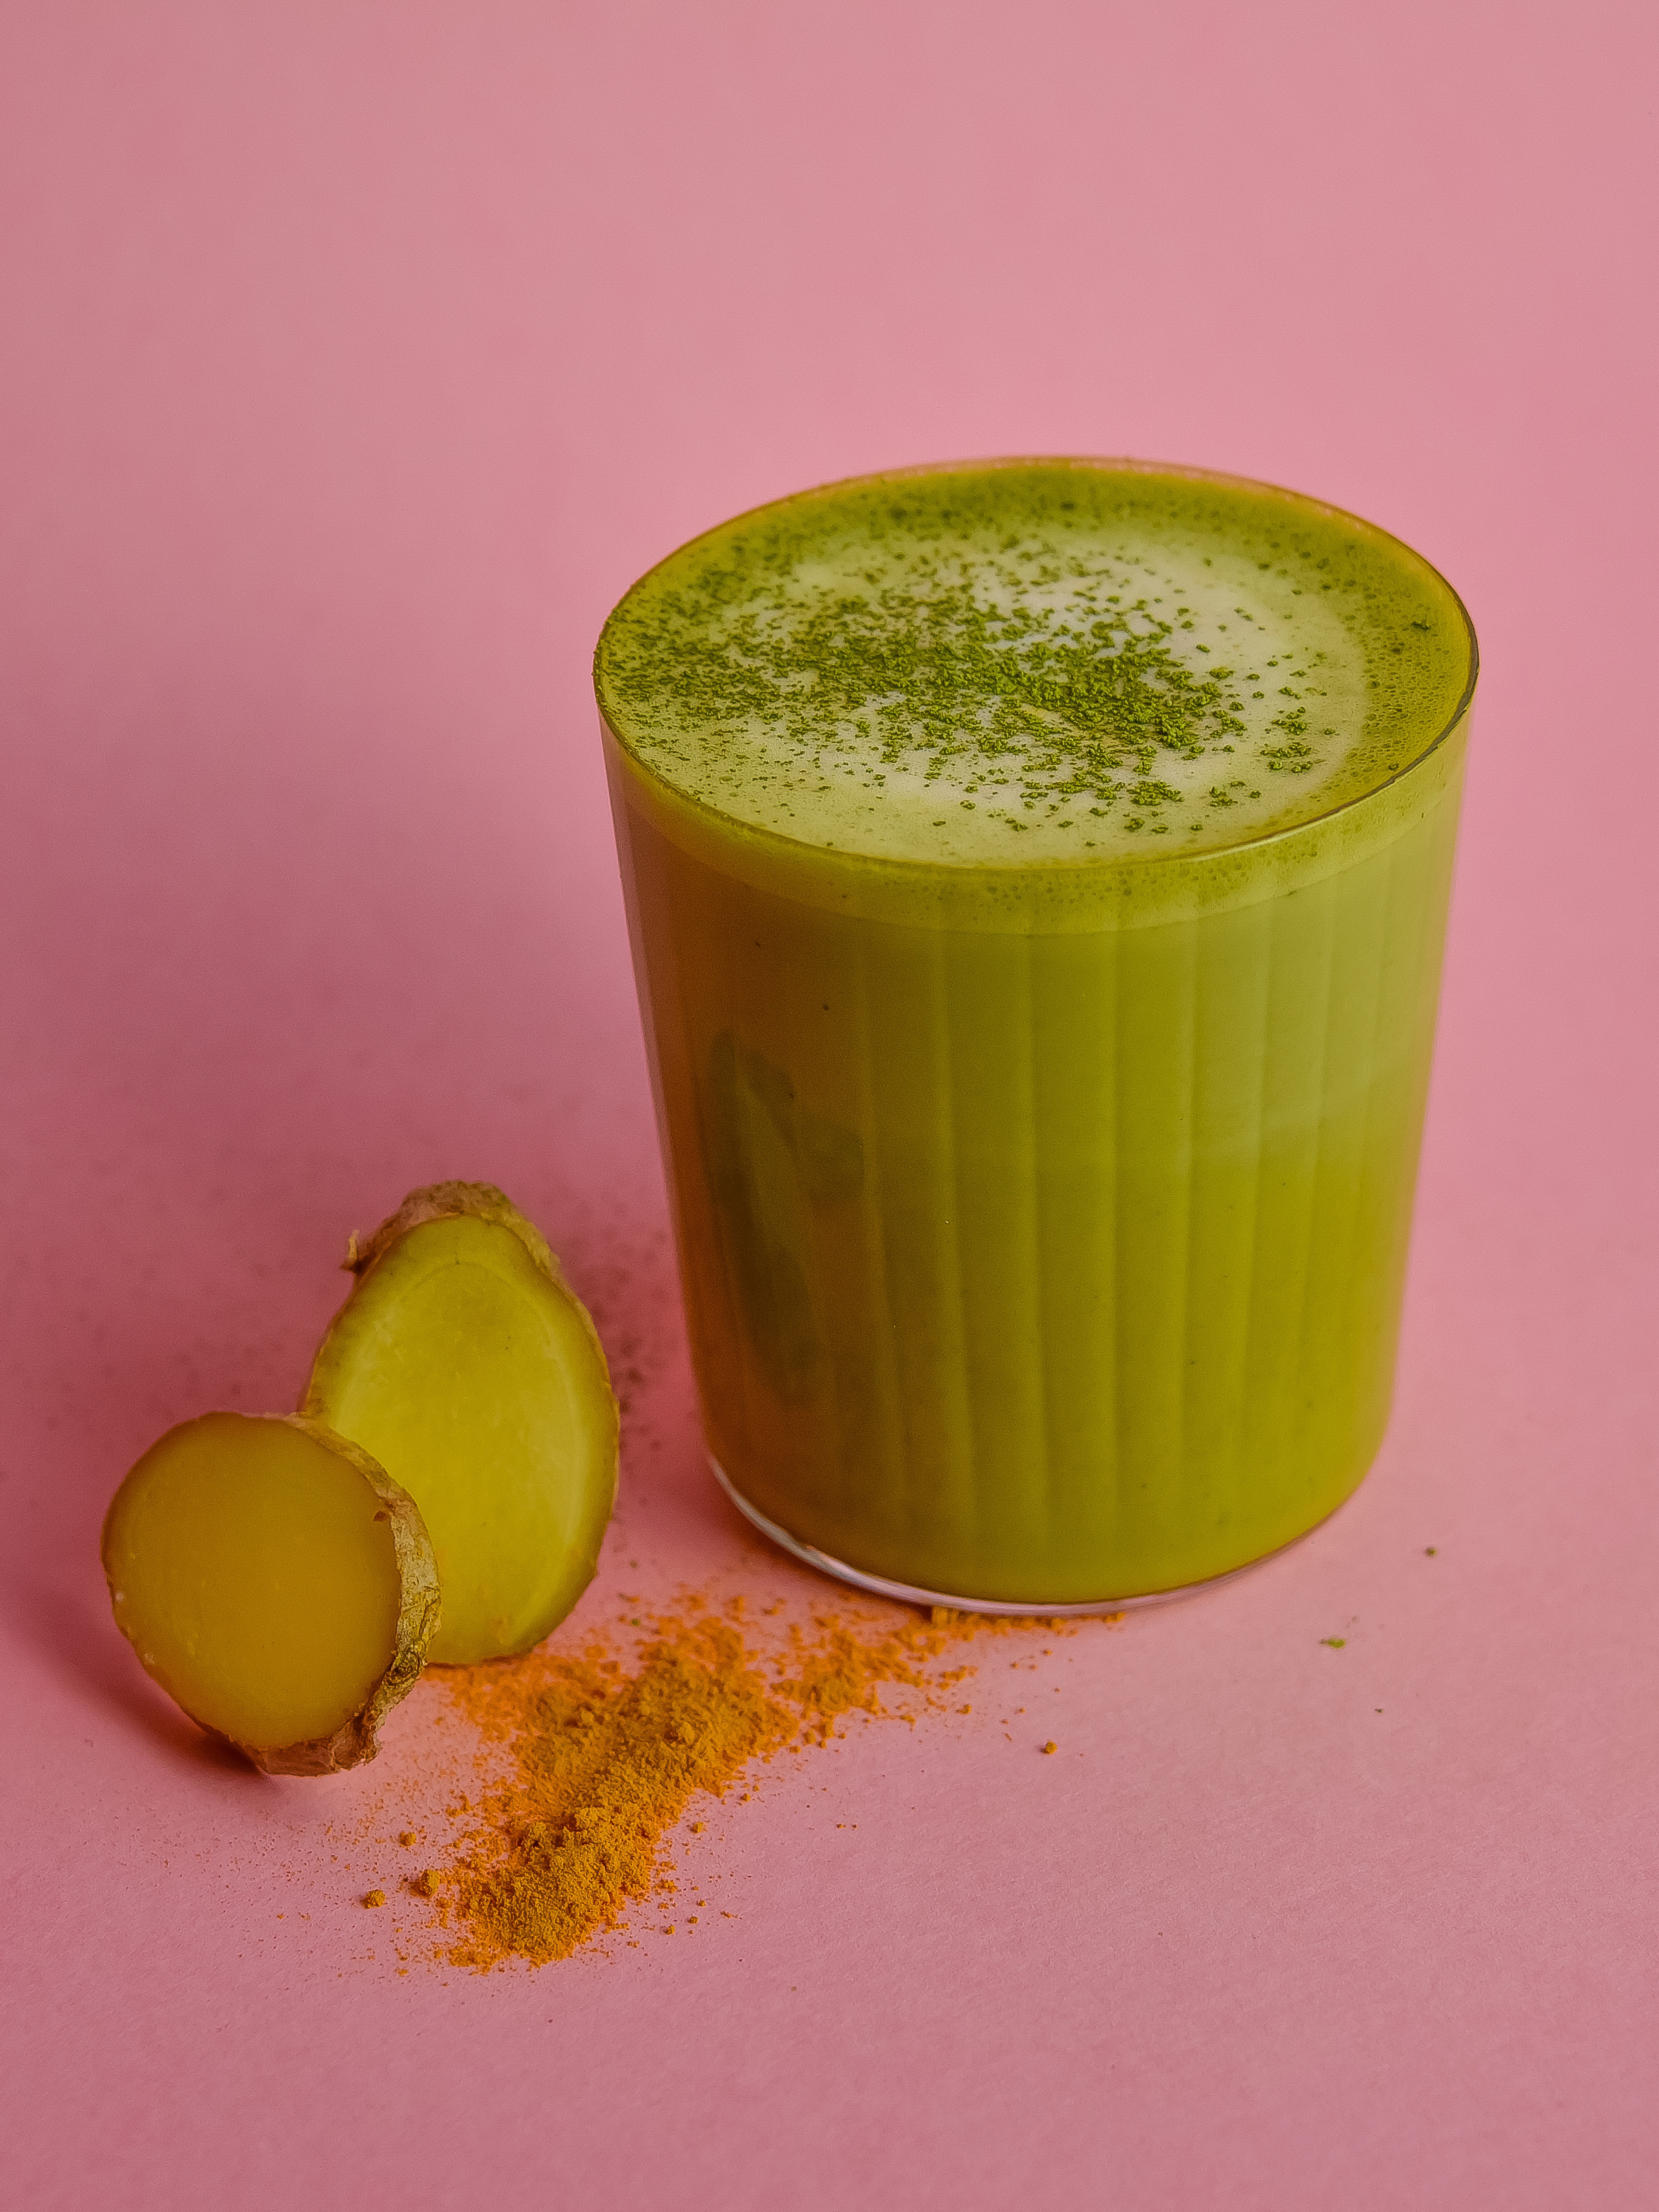 For a Caffeine Perk-up Without the Jitters, Meet Your Matcha